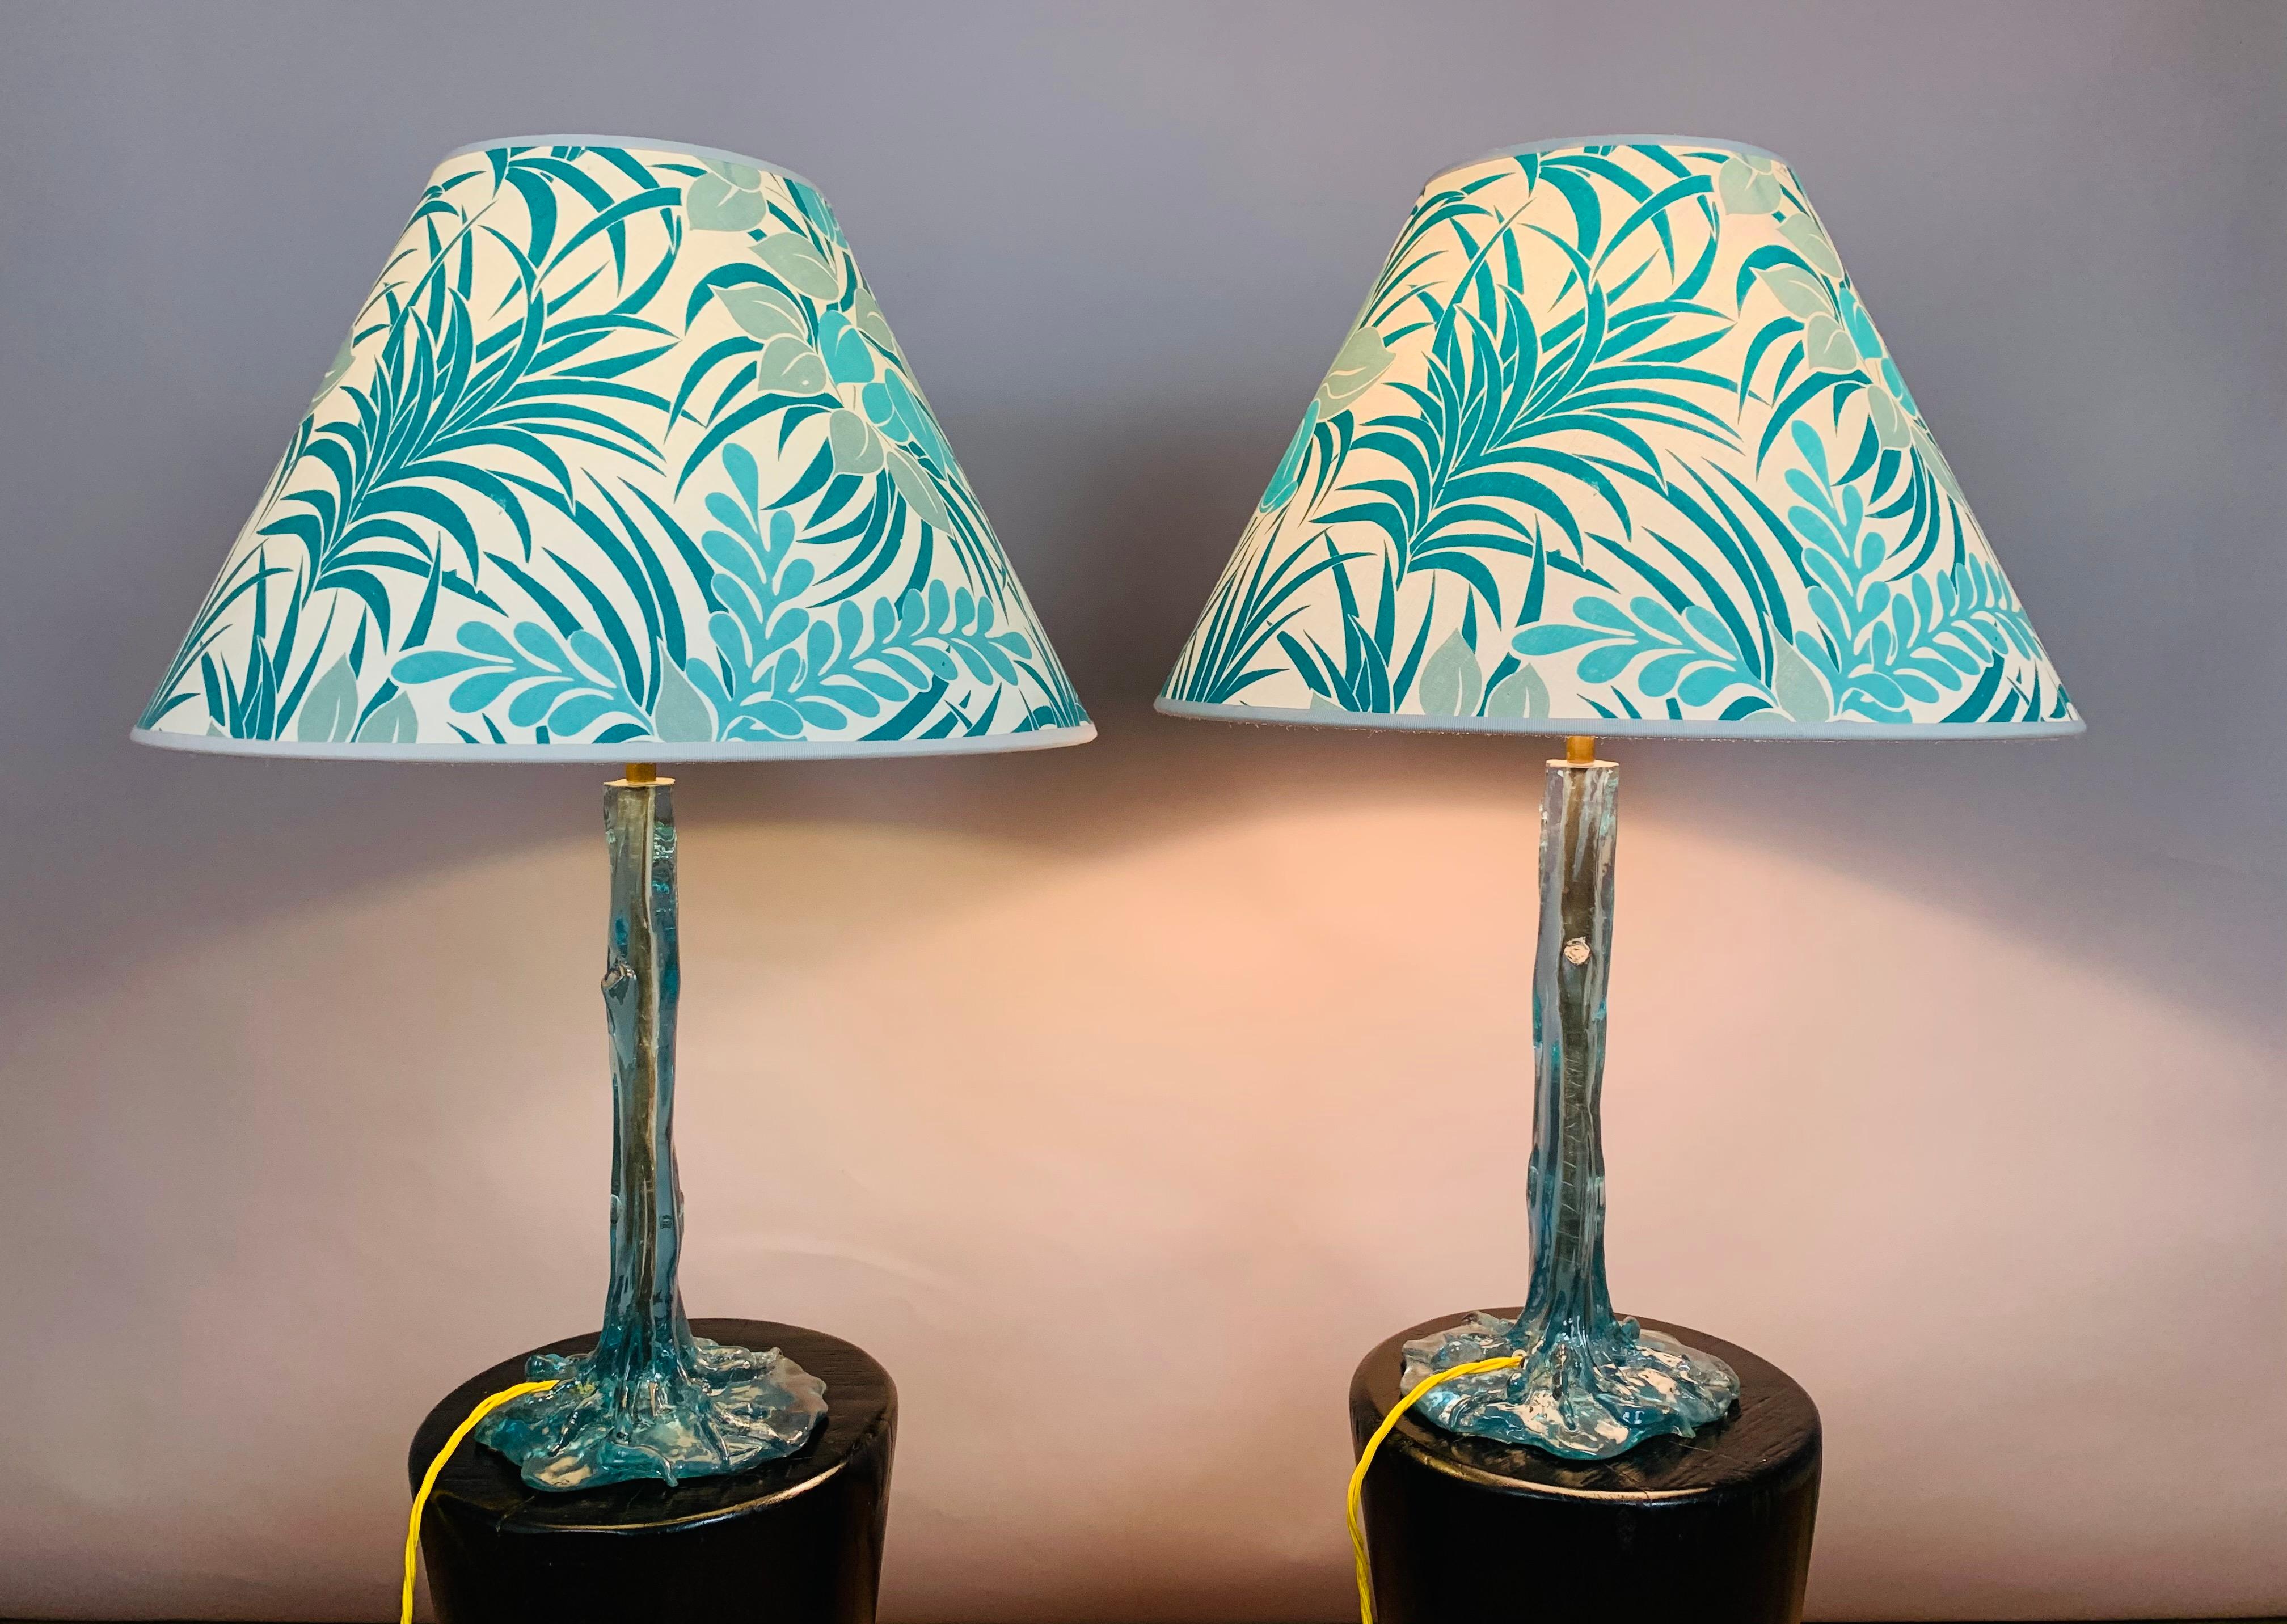 20th Century Pair of 1970s Turquoise Resin Tree & Roots Table Lamps Inc Original Shades